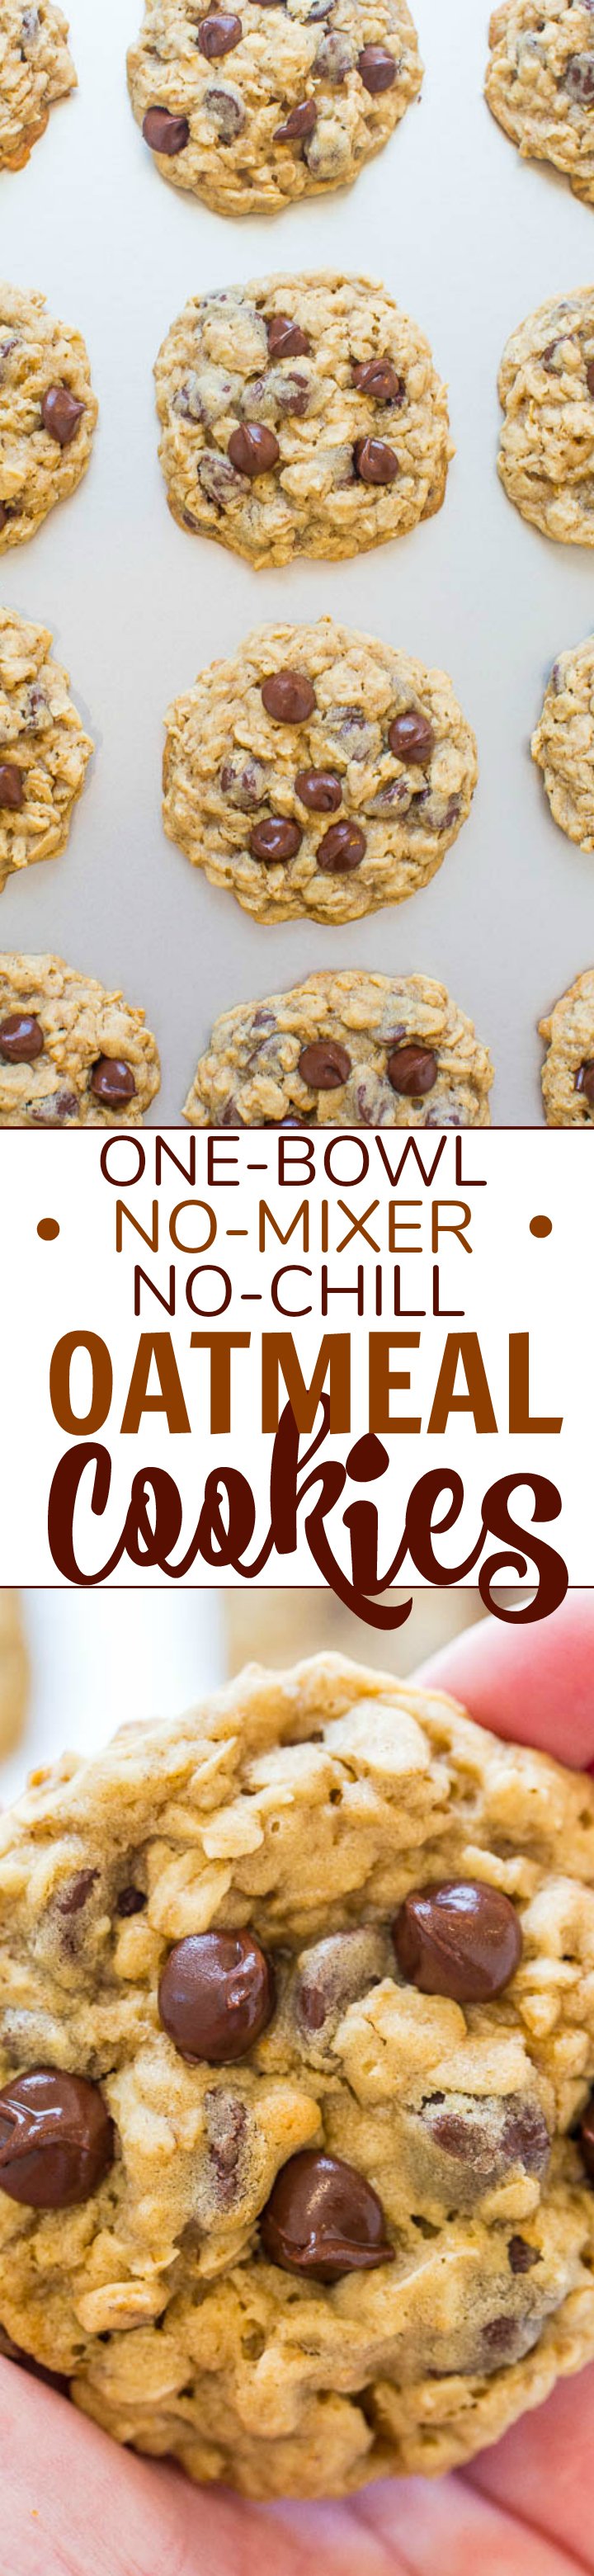 One-Bowl, No-Mixer, No-Chill Oatmeal Cookies - An incredibly FAST and EASY recipe that produces perfectly thick cookies with chewy edges and soft centers!! One bowl to wash, no mixer to drag out, and no waiting around!!